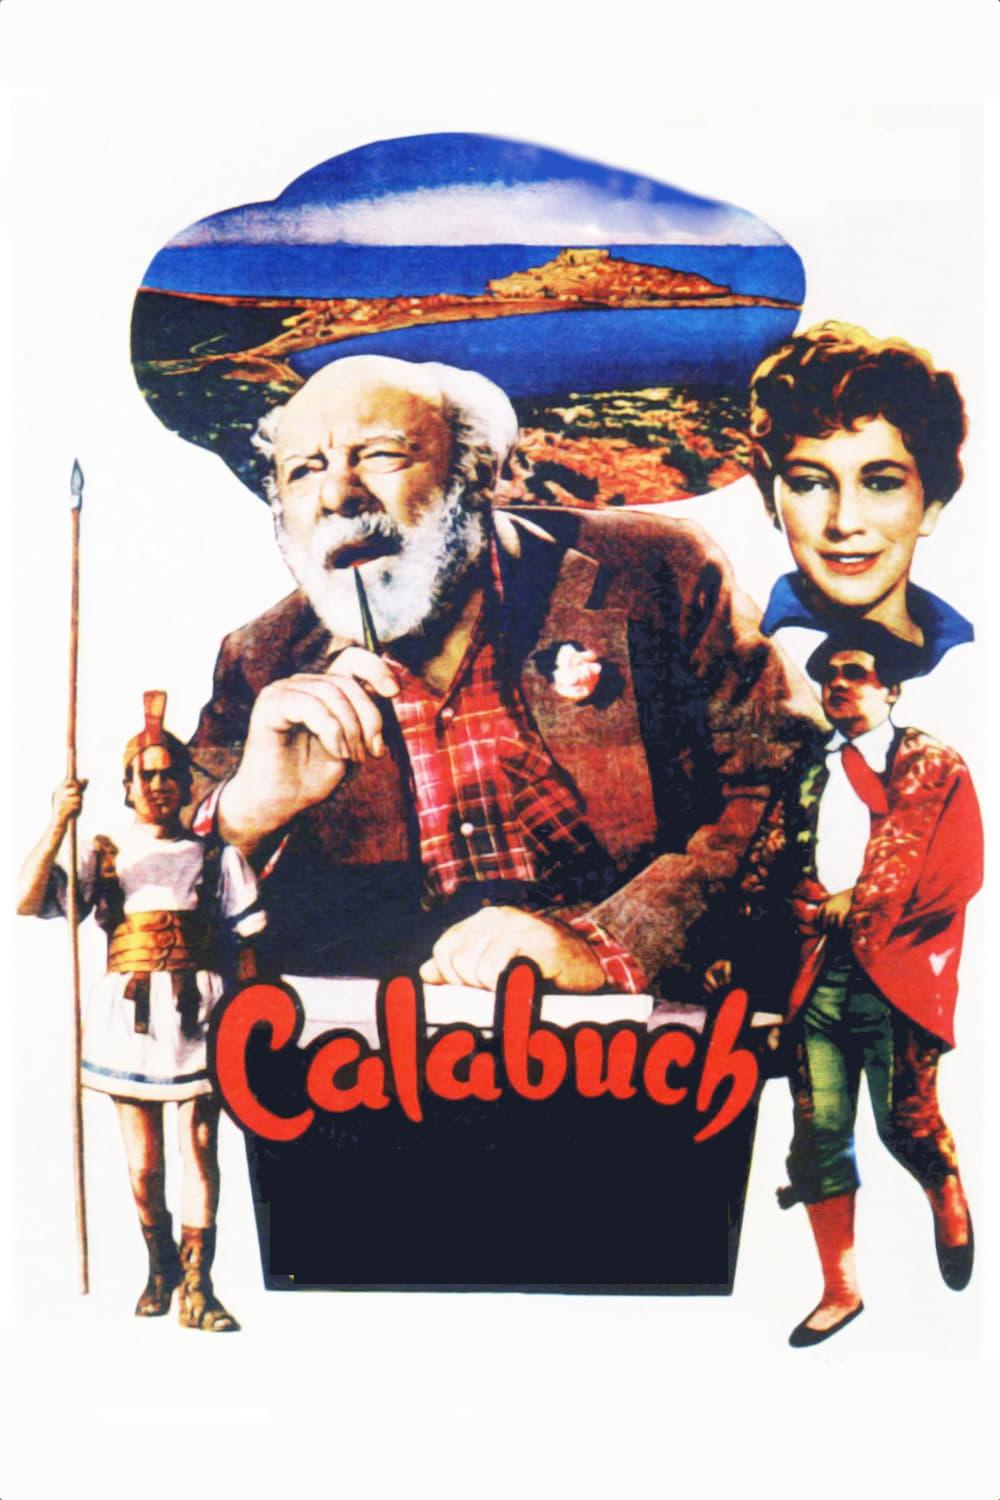 The Rocket from Calabuch poster